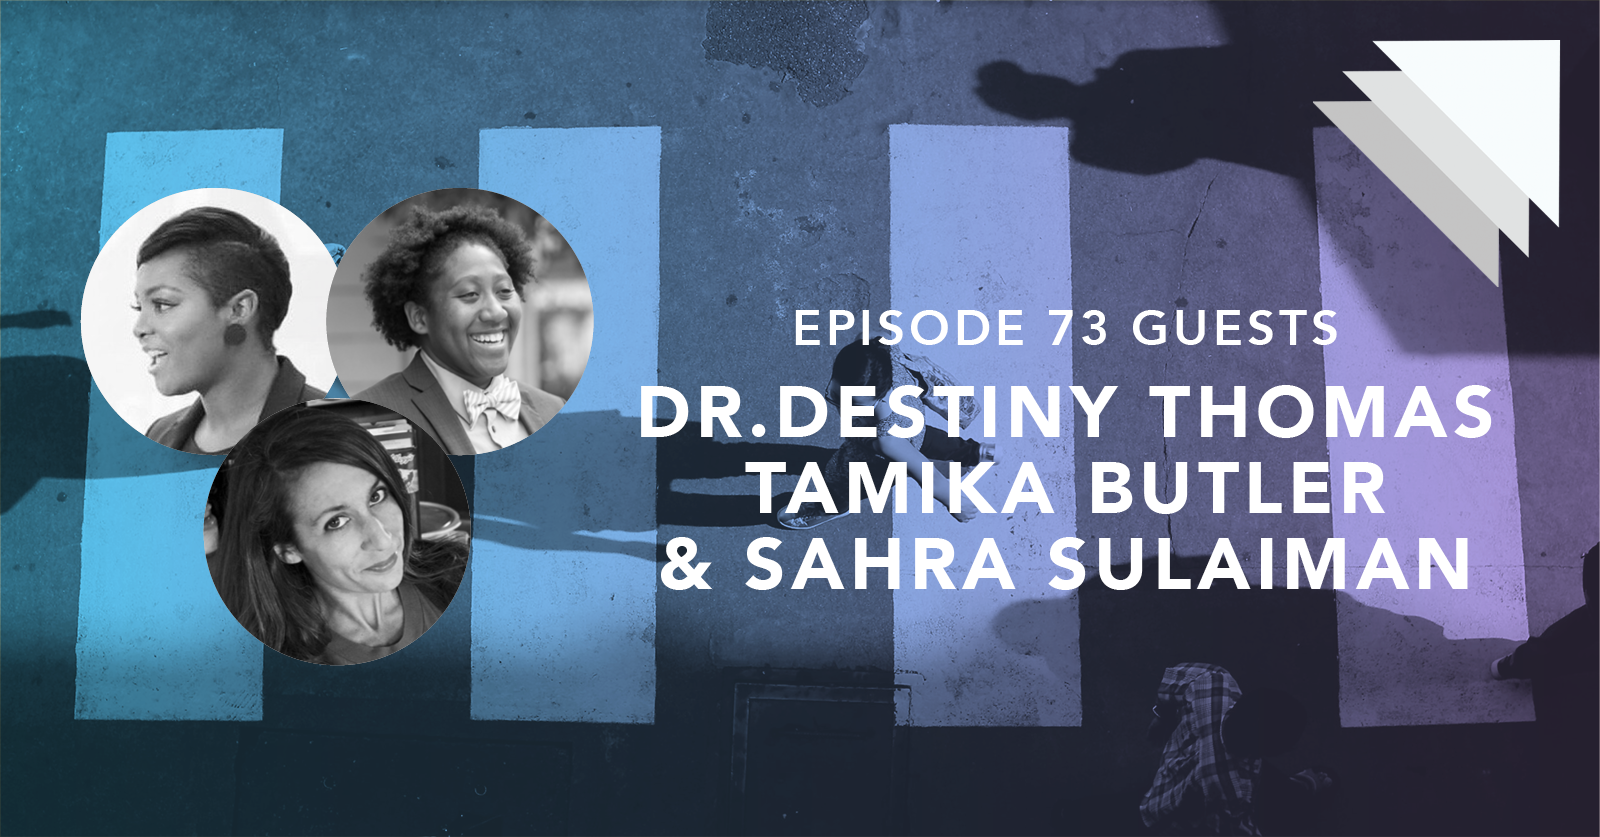 Episode 73 guests Dr. Destiny Thomas, Tamika Butler and Sahra Sulaiman